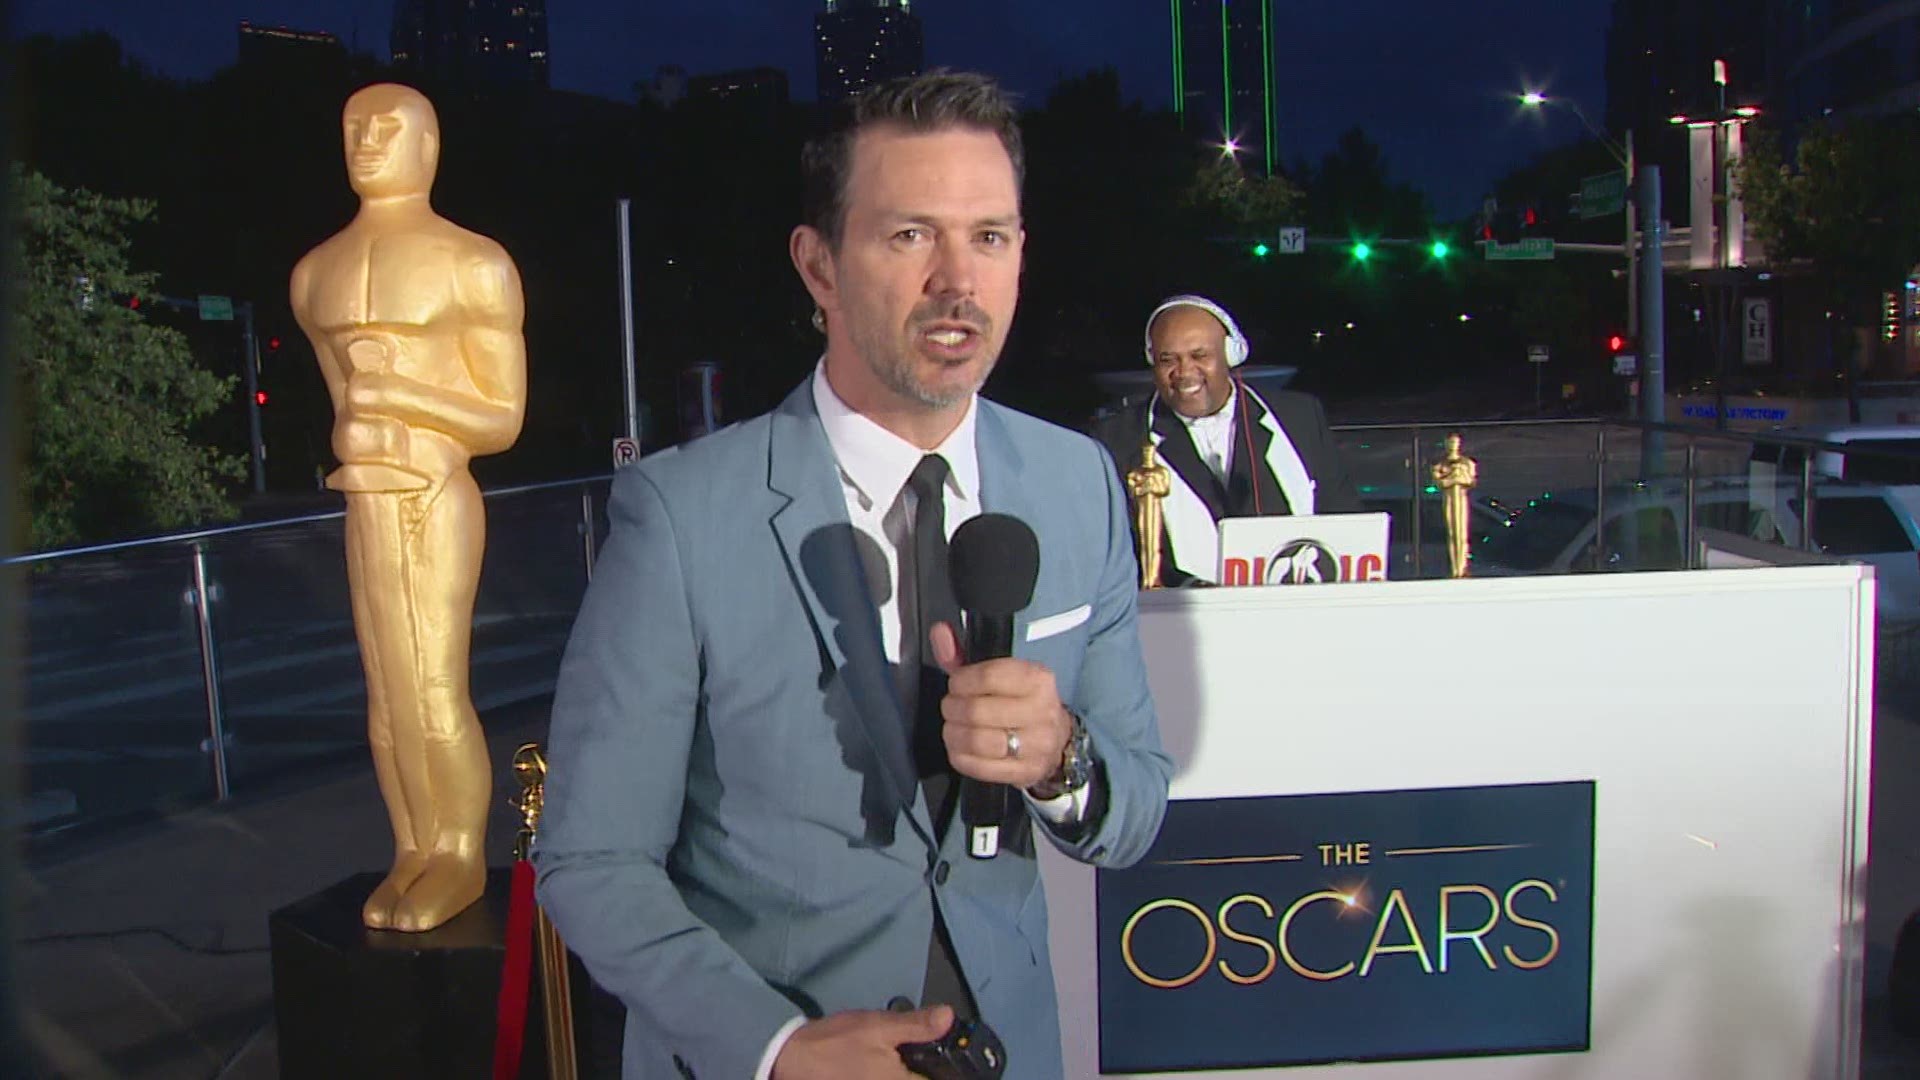 The Daybreak team is breaking down everything you need to know about the Oscars and the fashion. Plus, they're having a little fun with it.